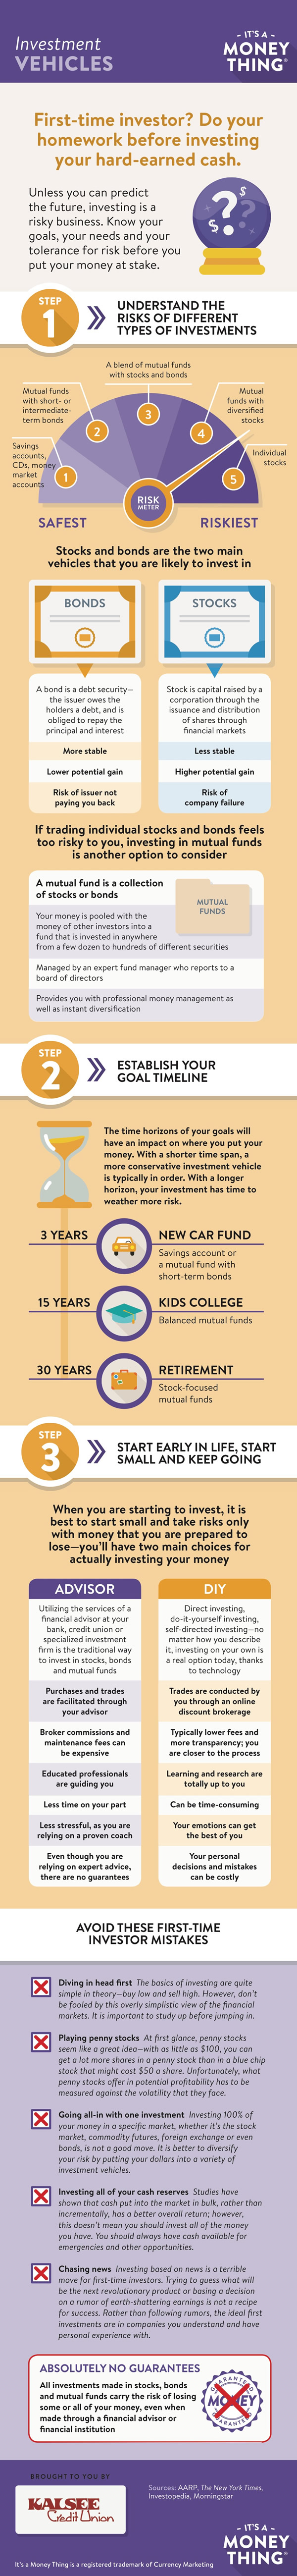 Investment vehicles infographic, click for transcription